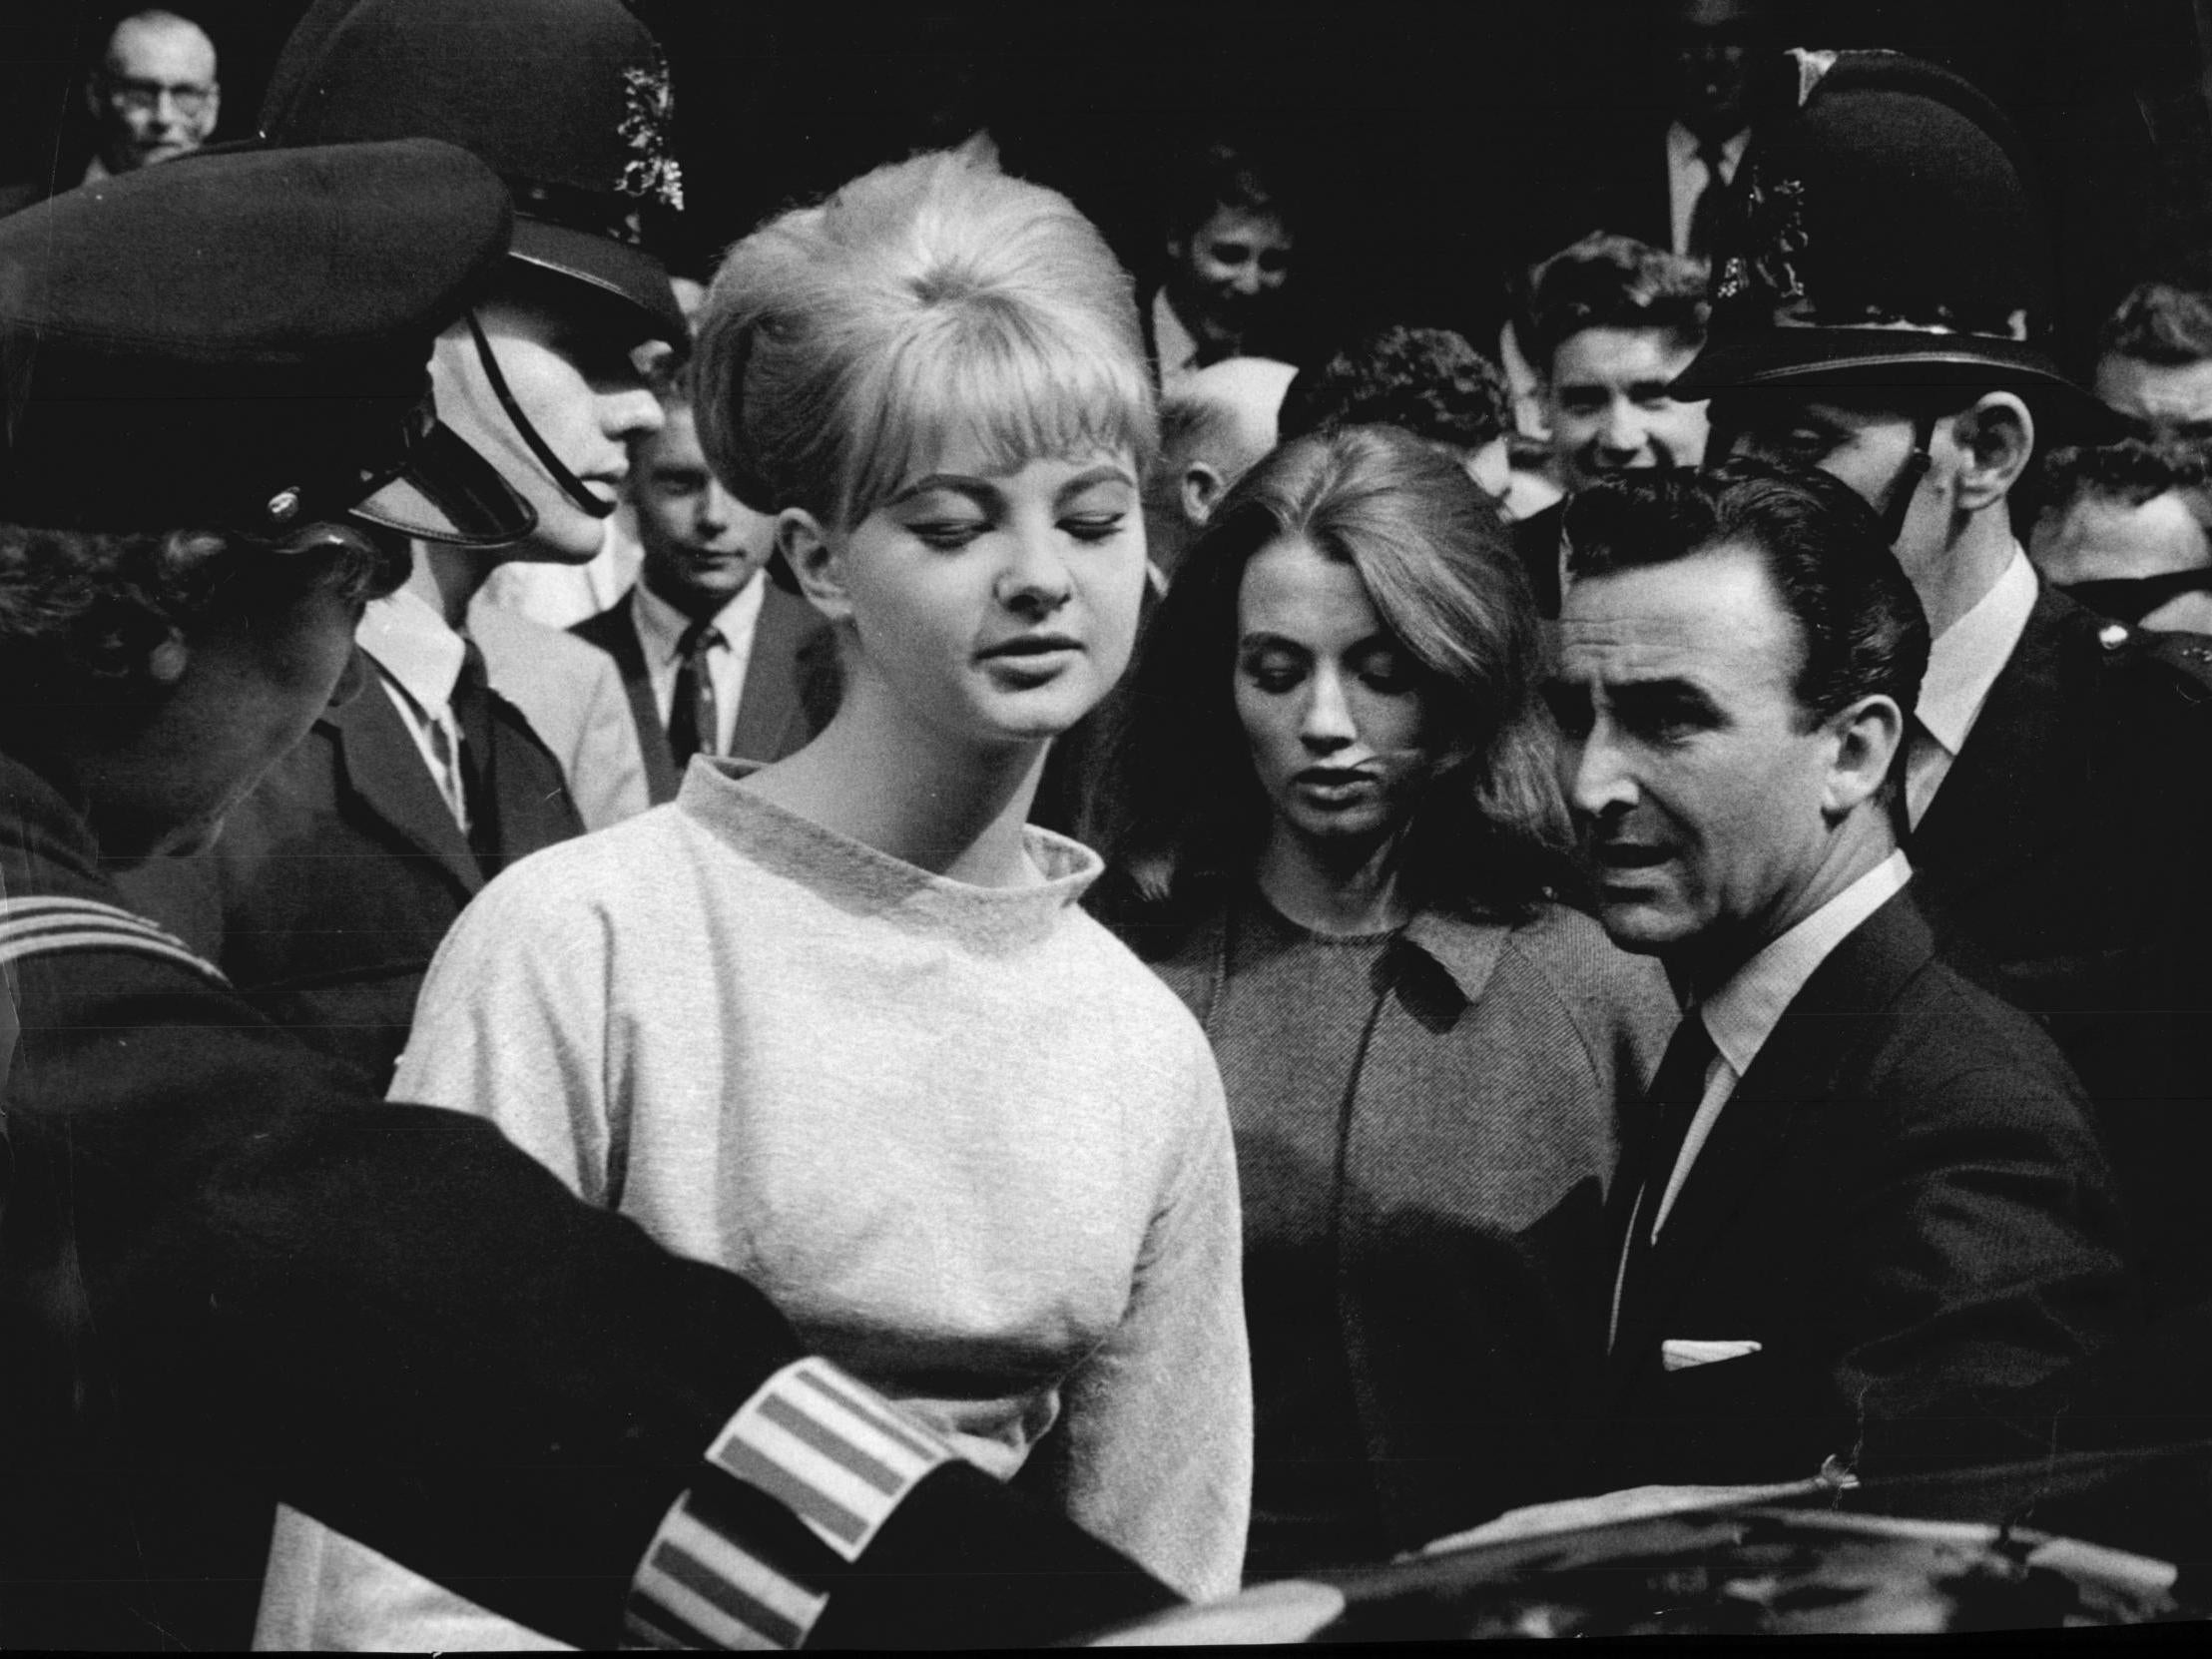 Mandy Rice-Davies pictured in 1963.